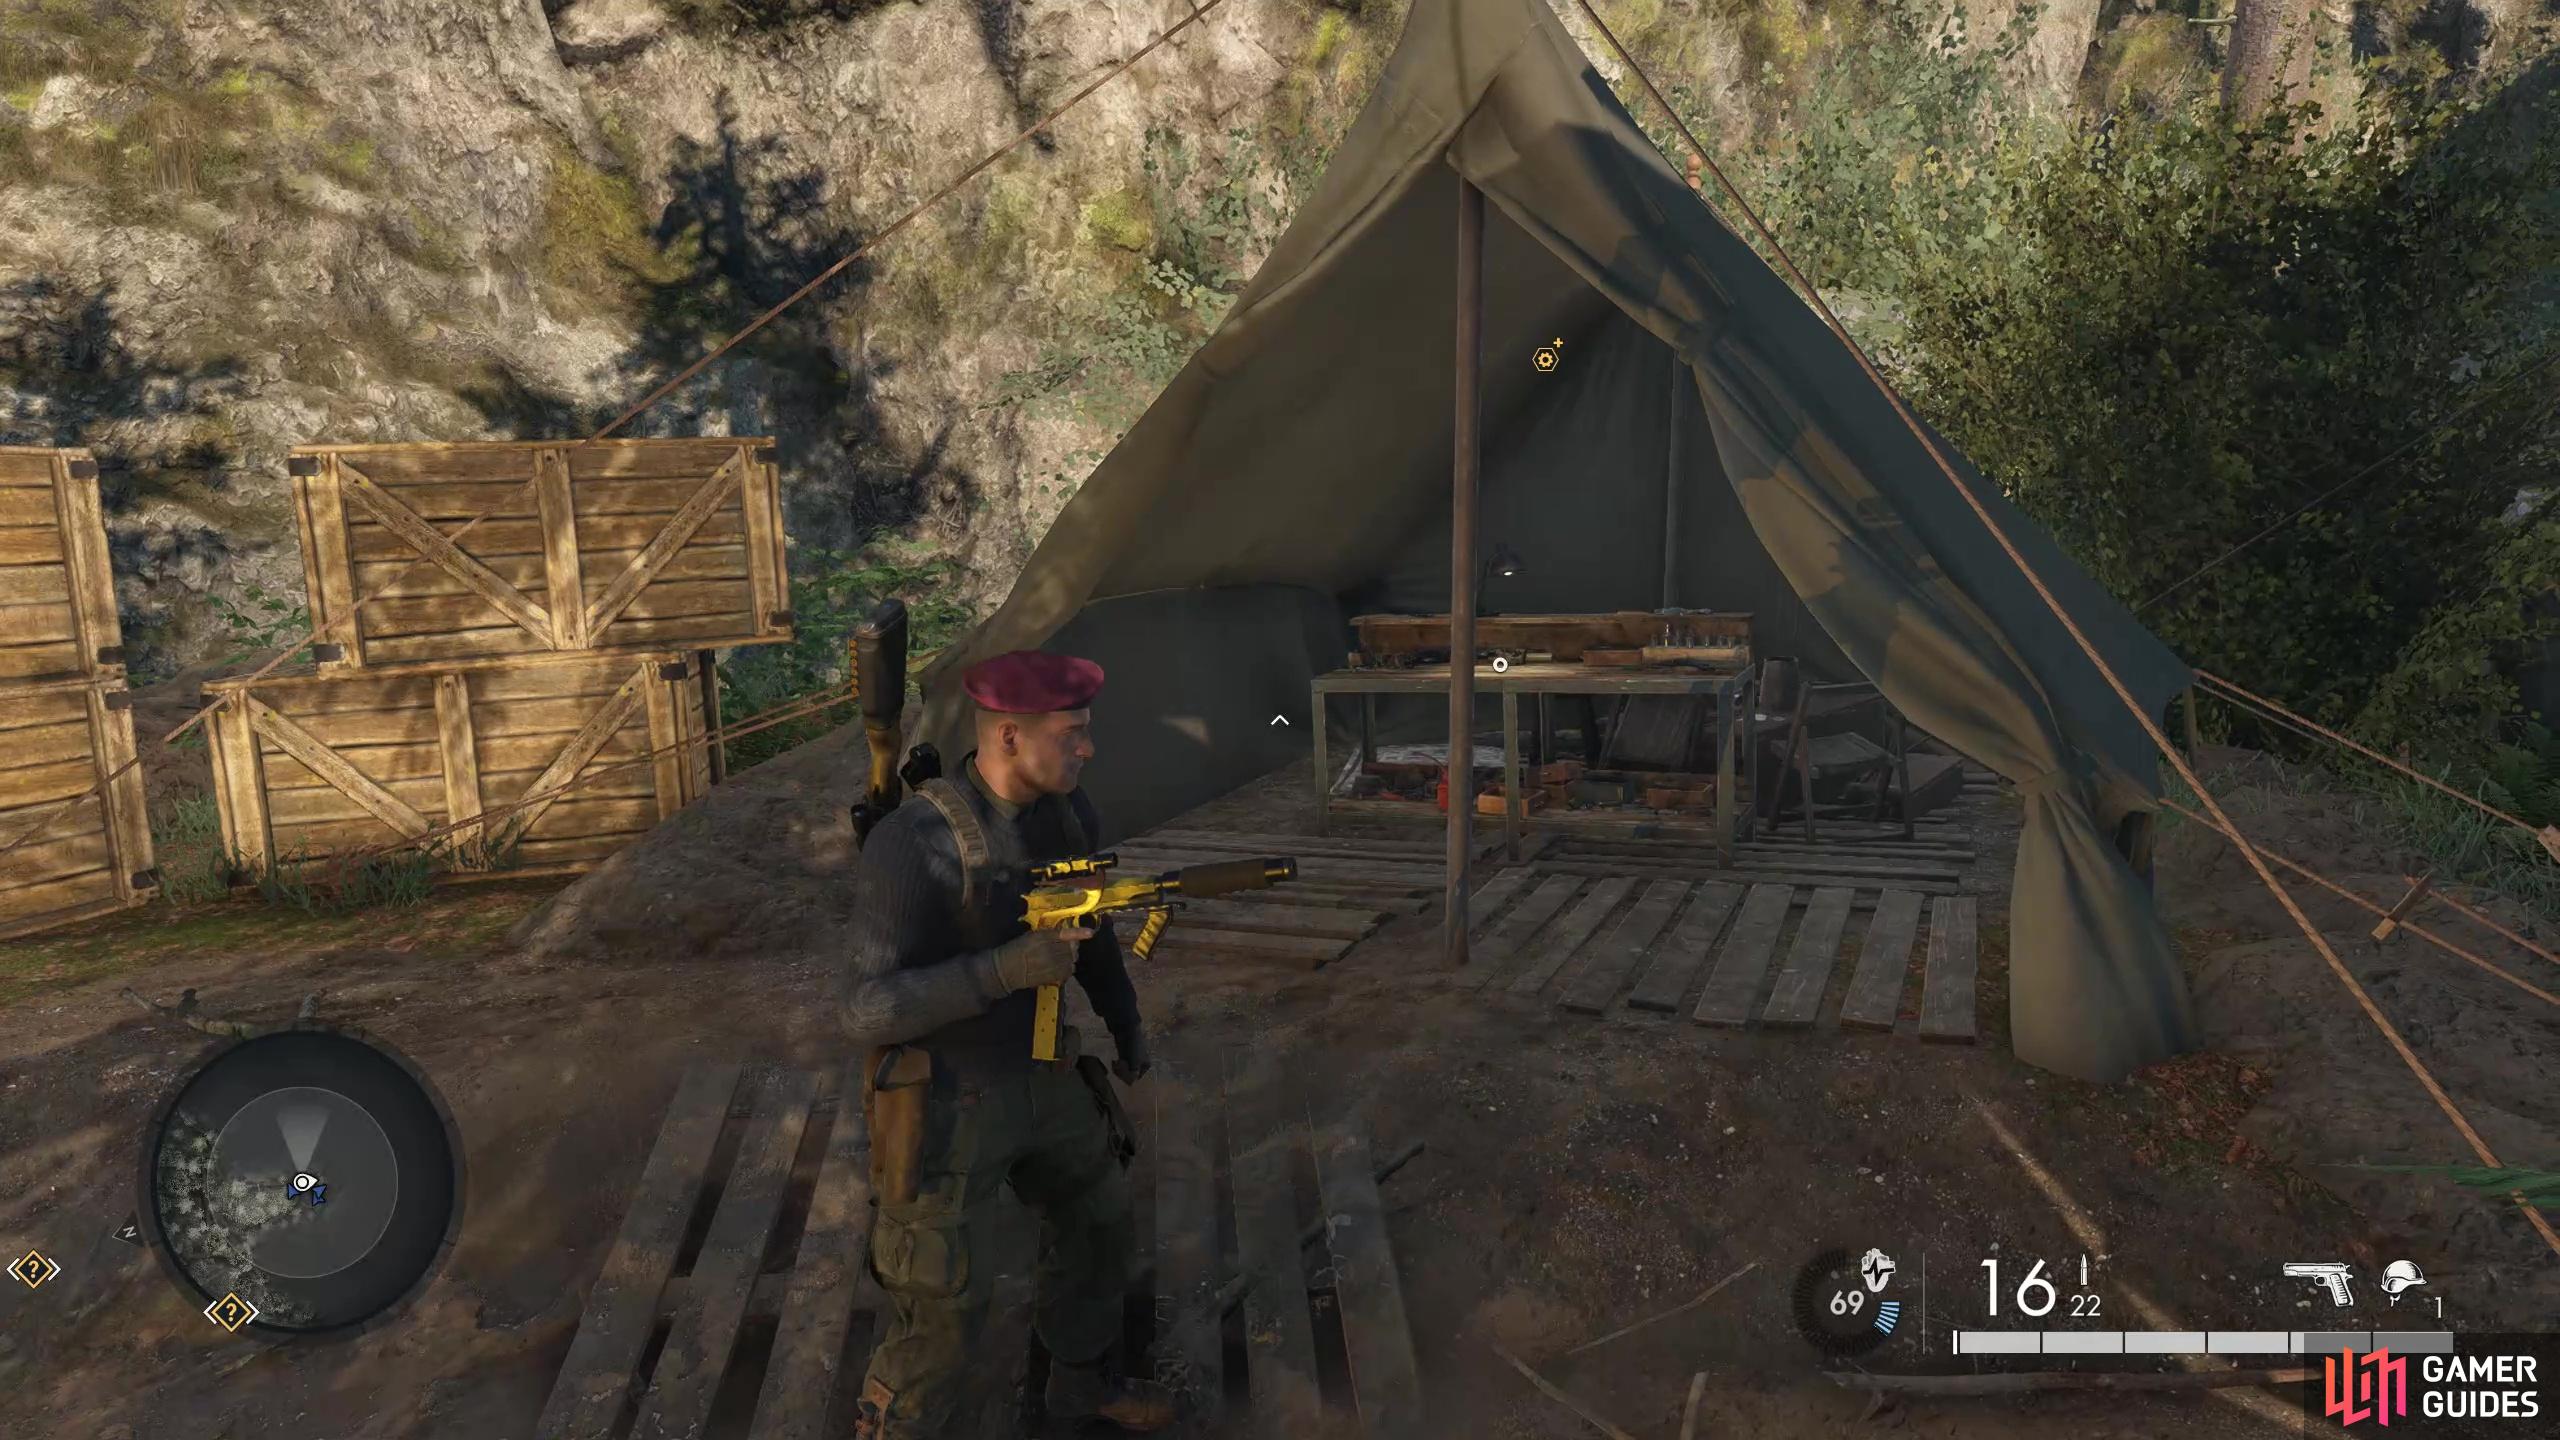 Once at the top you will come across lots of goodies and this tent that contains the Resistance Camp Workbench.